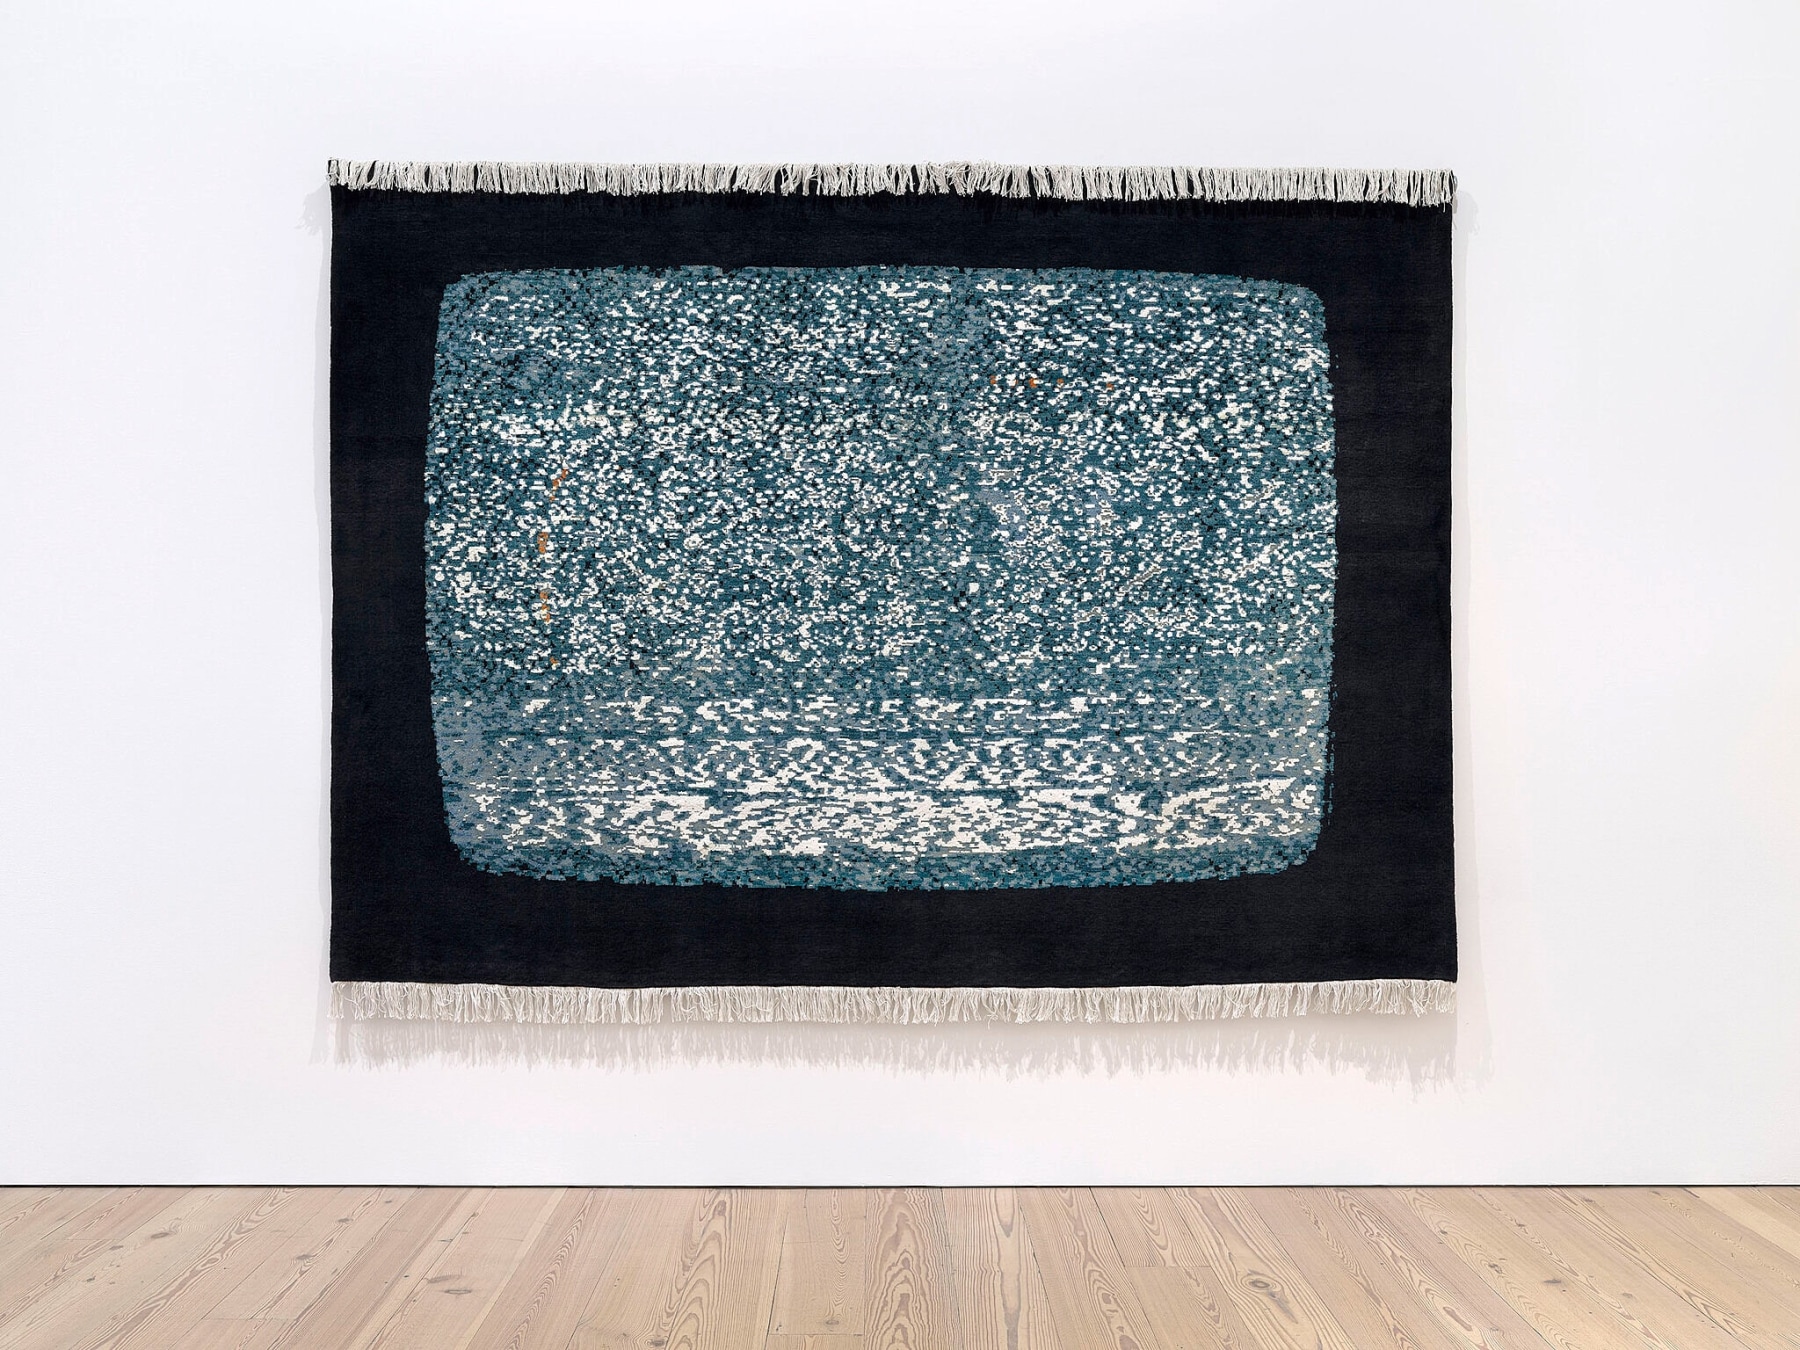 Installation view of the Whitney Biennial 2019 (Whitney Museum of American Art, New York, May 17-September 22, 2019). Nicholas Galanin,&amp;nbsp;White Noise, American Prayer Rug, 2018. Photograph by Ron Amstutz